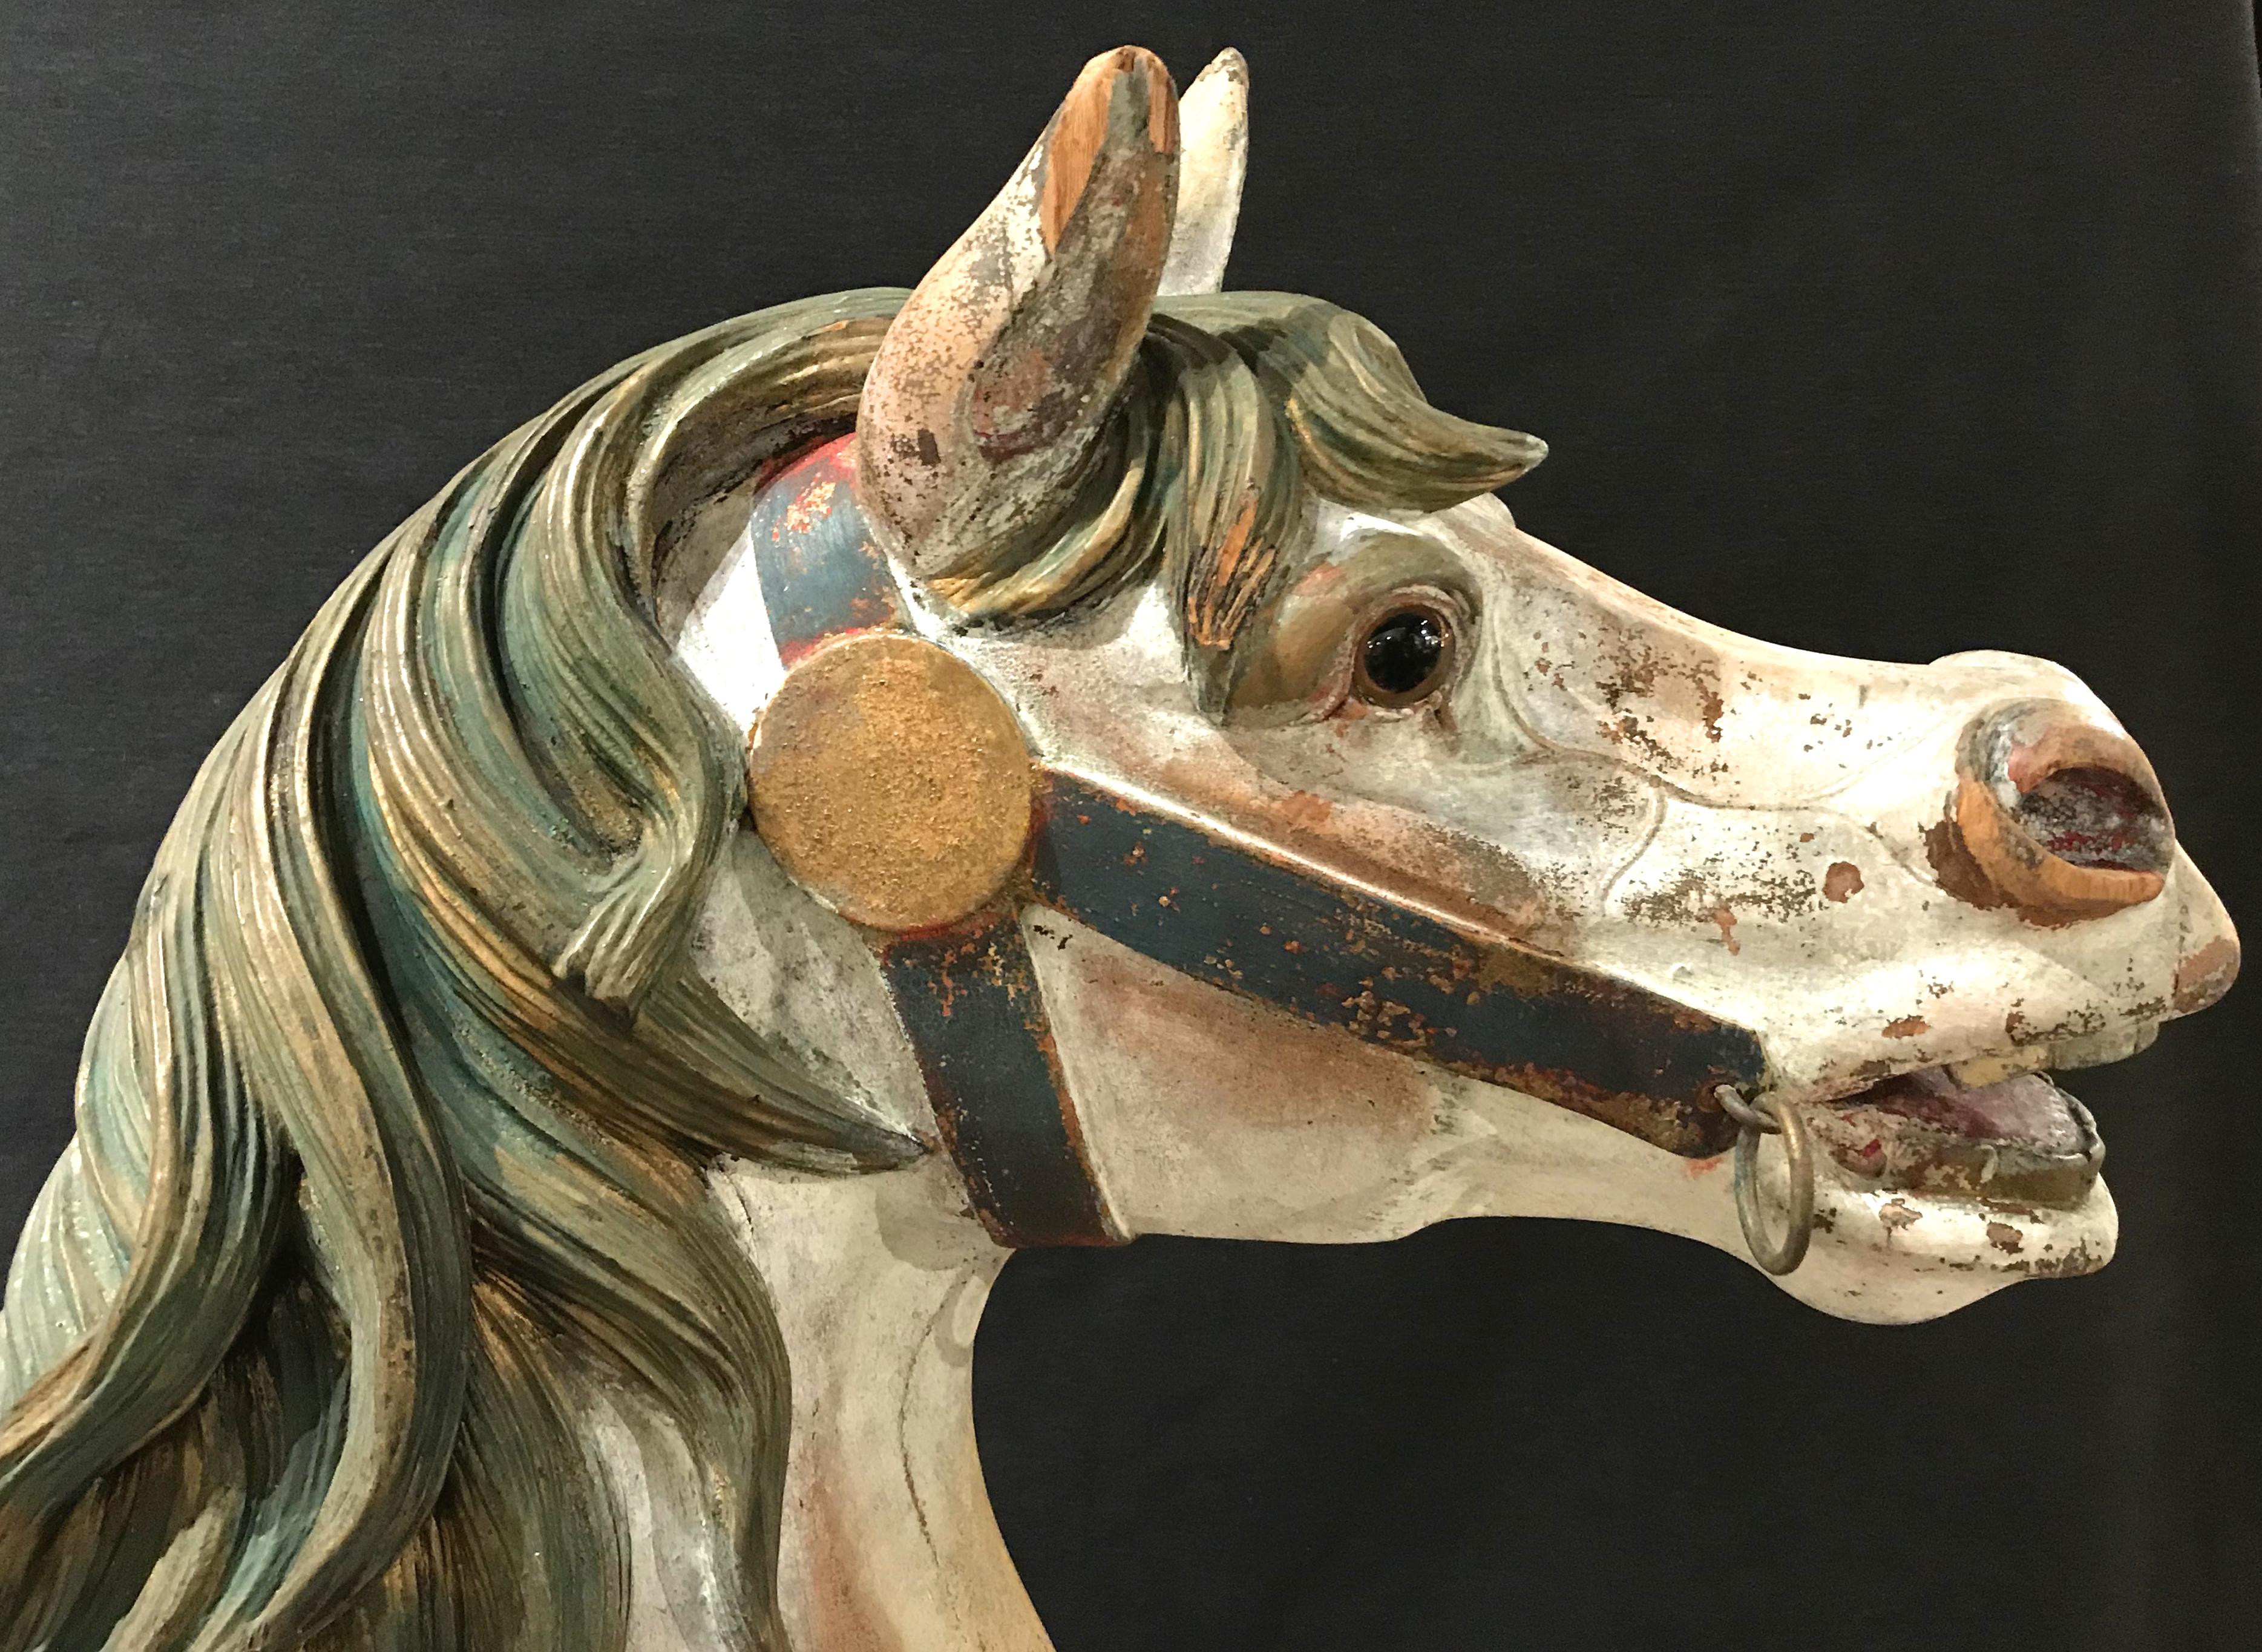 A fine example of a polychrome hand carved wooden carousel horse by the Philadelphia Toboggan Company. This was a second row horse with glass eyes and a real horse hair tail. The horse is in very good overall condition, with some of its original